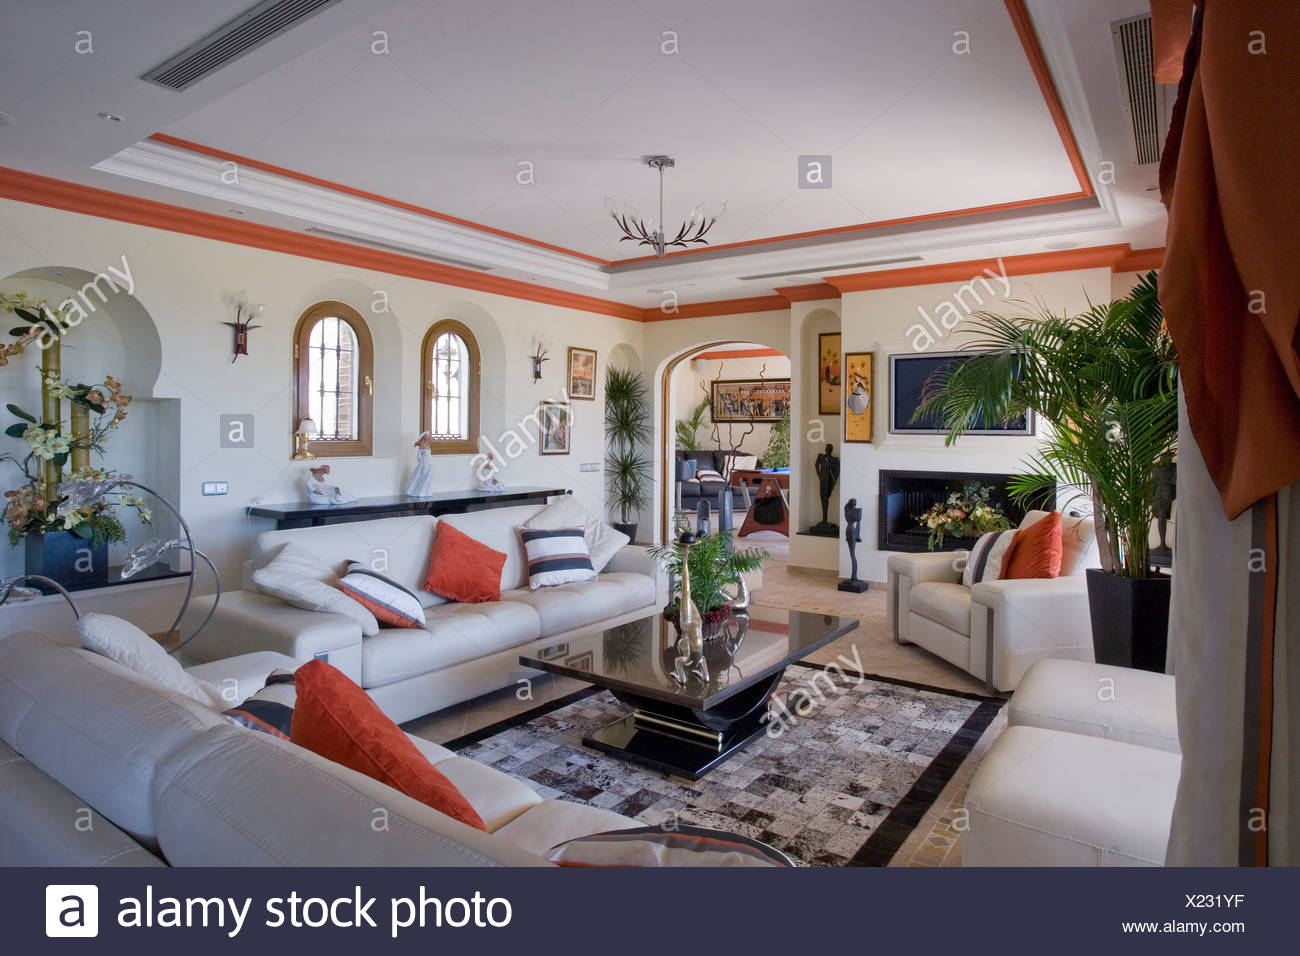 Red Cushions On White Sofas In Spanish Apartment Living Room